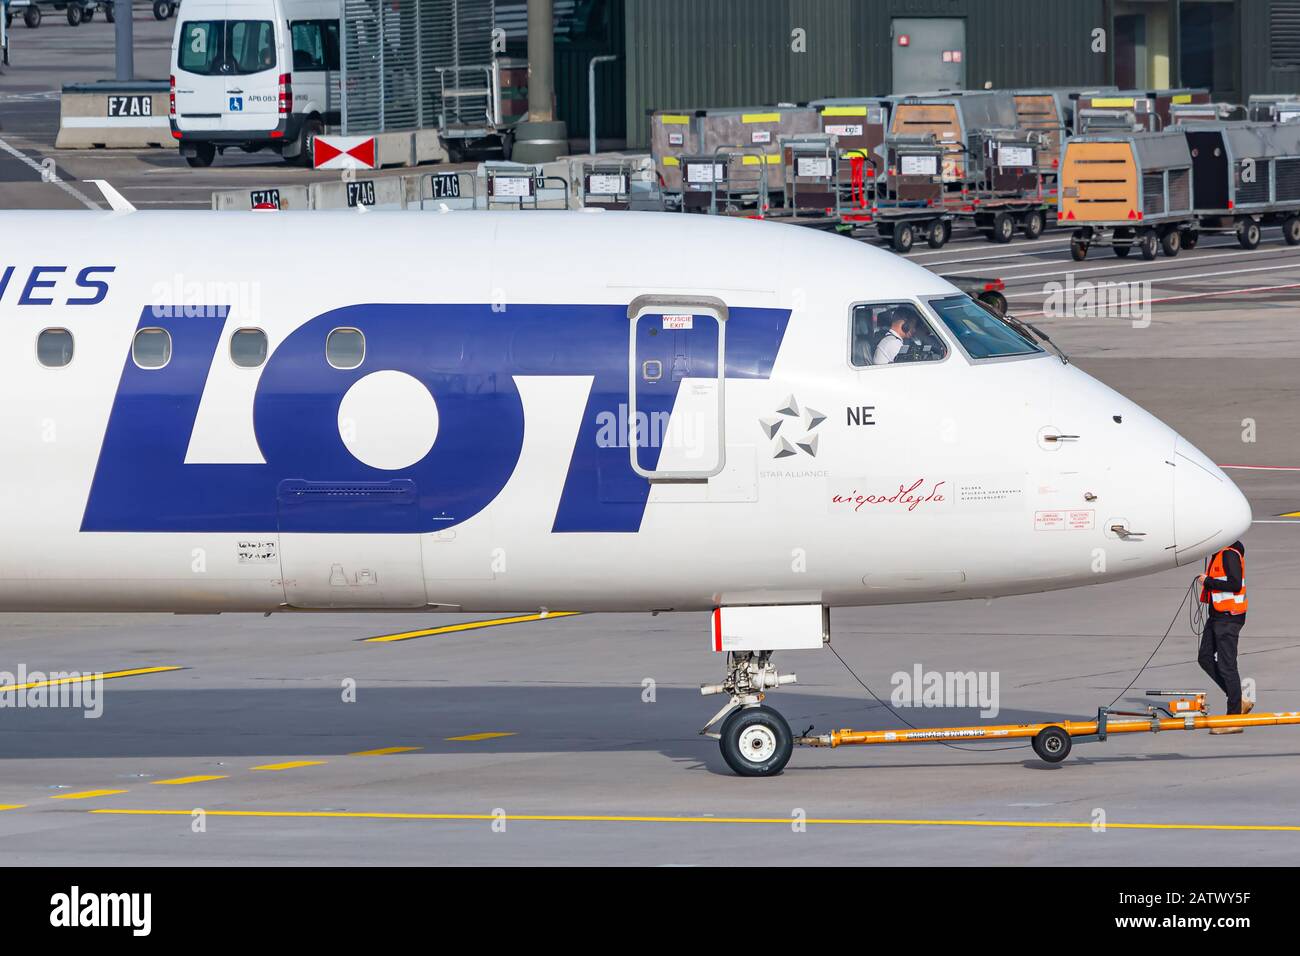 Zurich, Switzerland - February 1, 2020: LOT Polish Airlines Embraer E195 airplane at Zurich airport (ZRH) in Switzerland. Embraer is an aircraft manuf Stock Photo